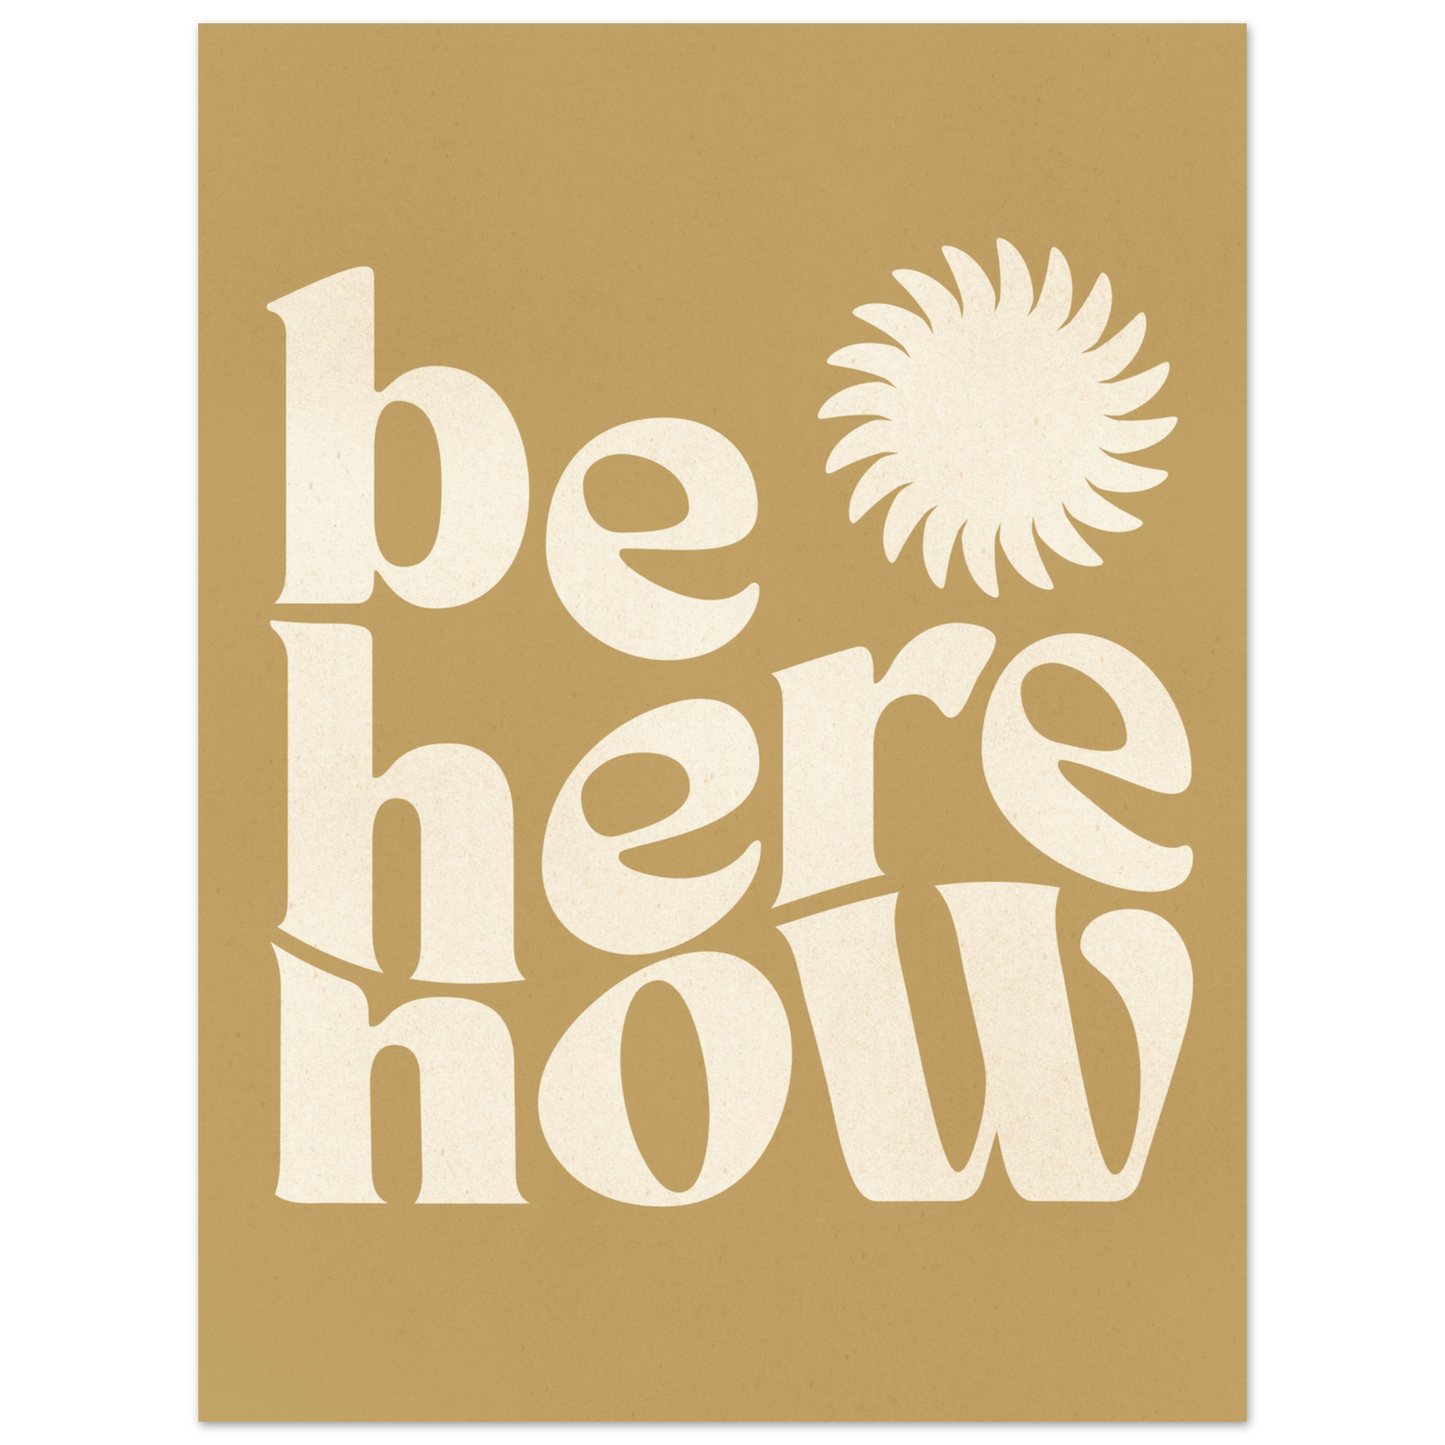 Be Here Now Print